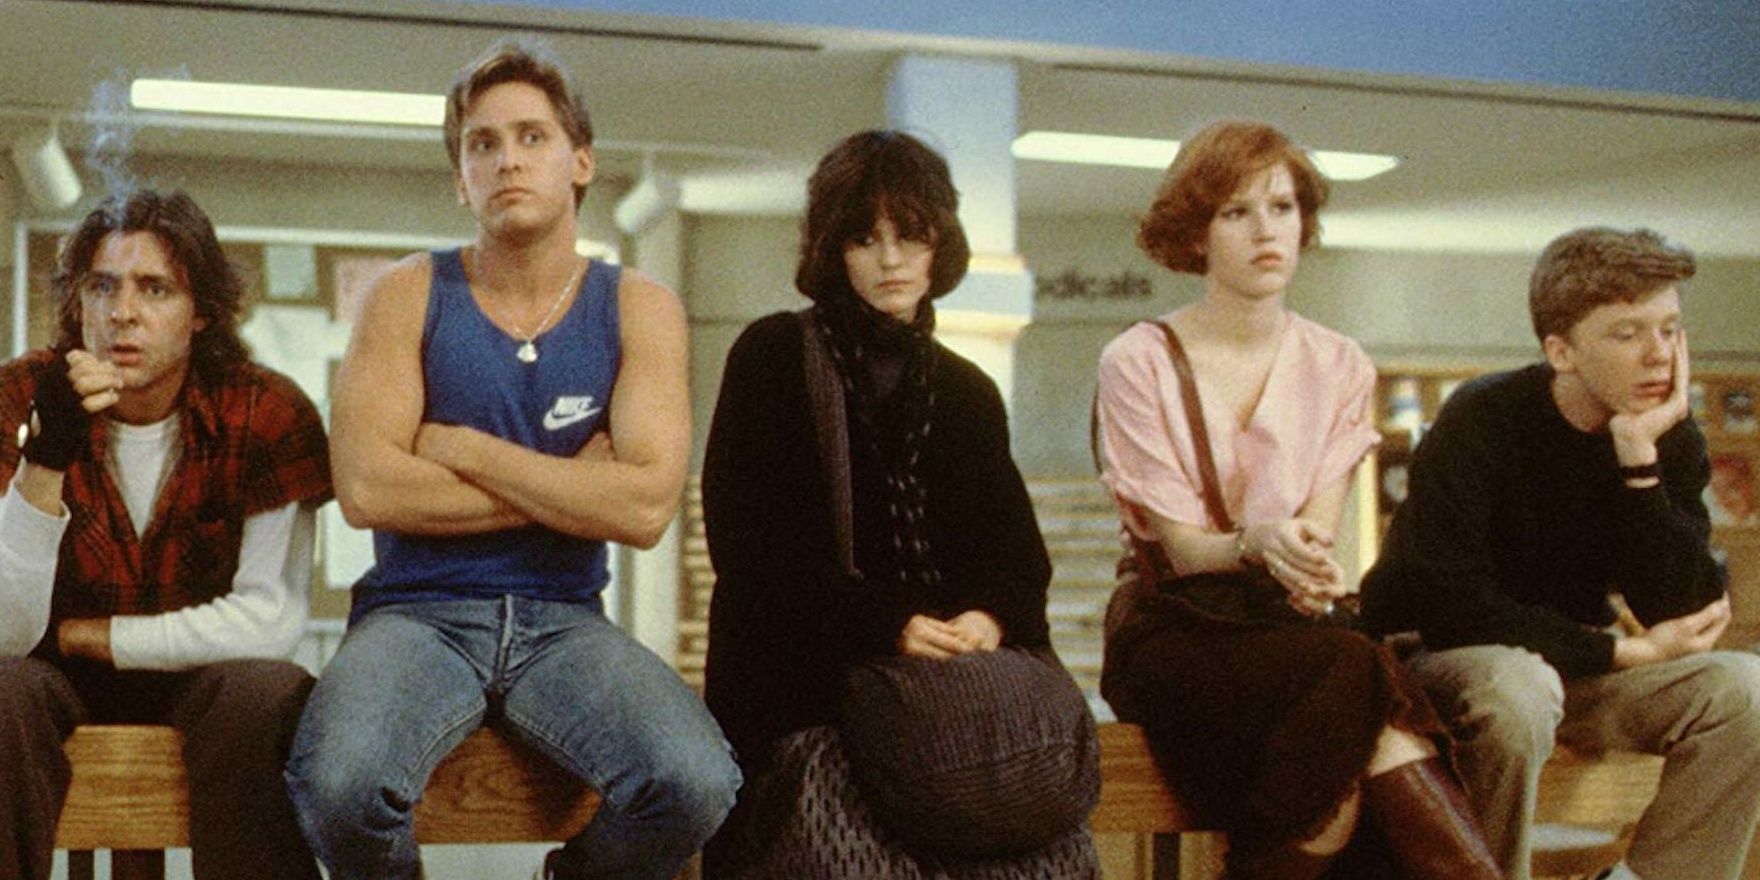 John Hughes’ 10 Best Movies Ranked by Rotten Tomatoes Score